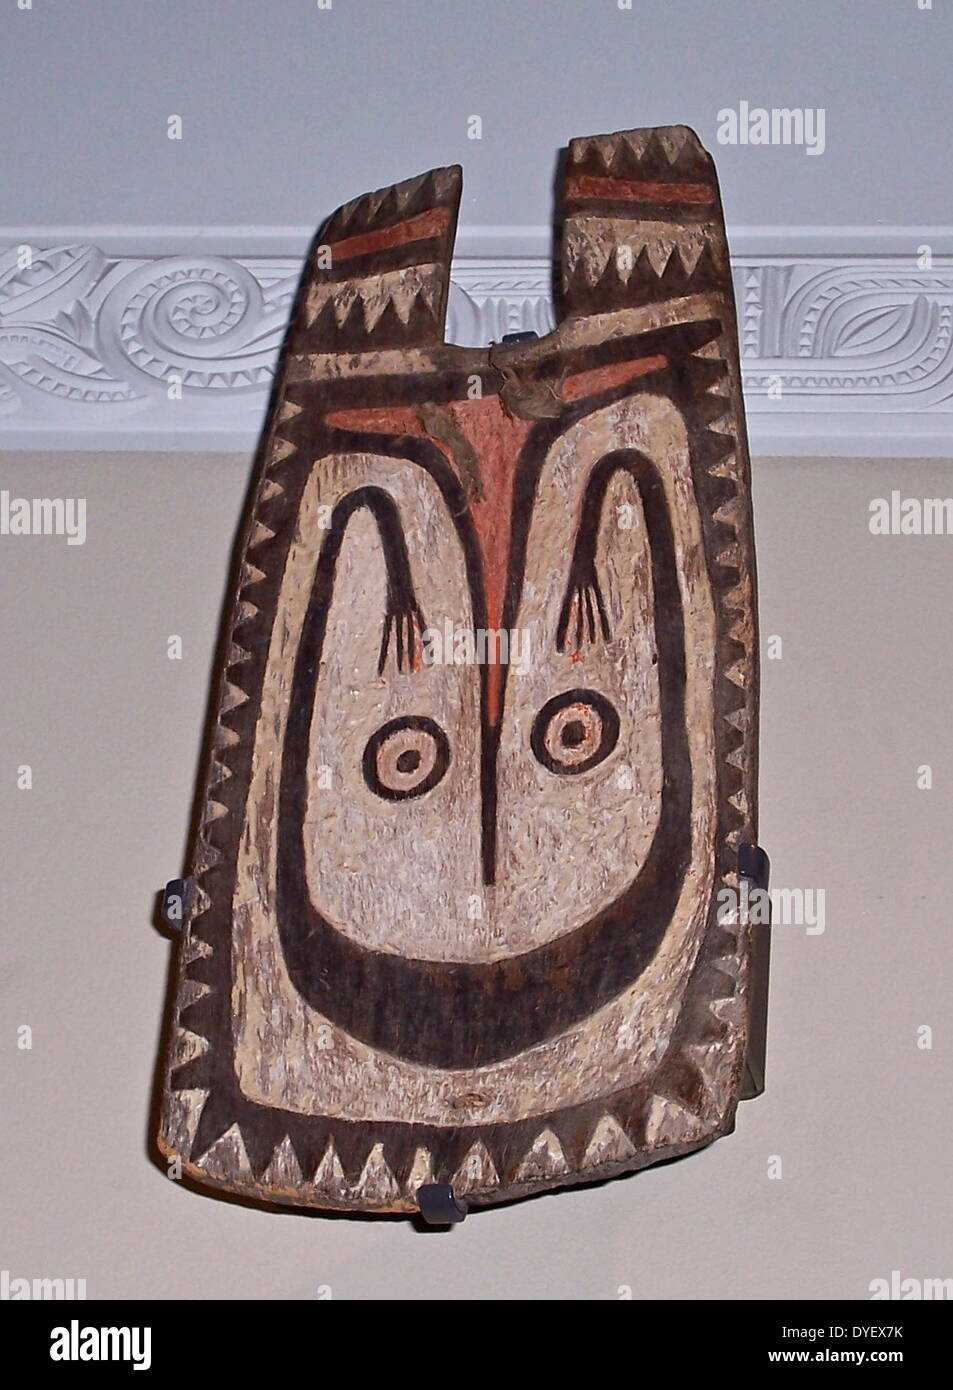 Tribal art: Decorated wooden board from the South Pacific. Displayed in ceremonies by the Elema people from Gulf of Papua, New Guinea. Stock Photo